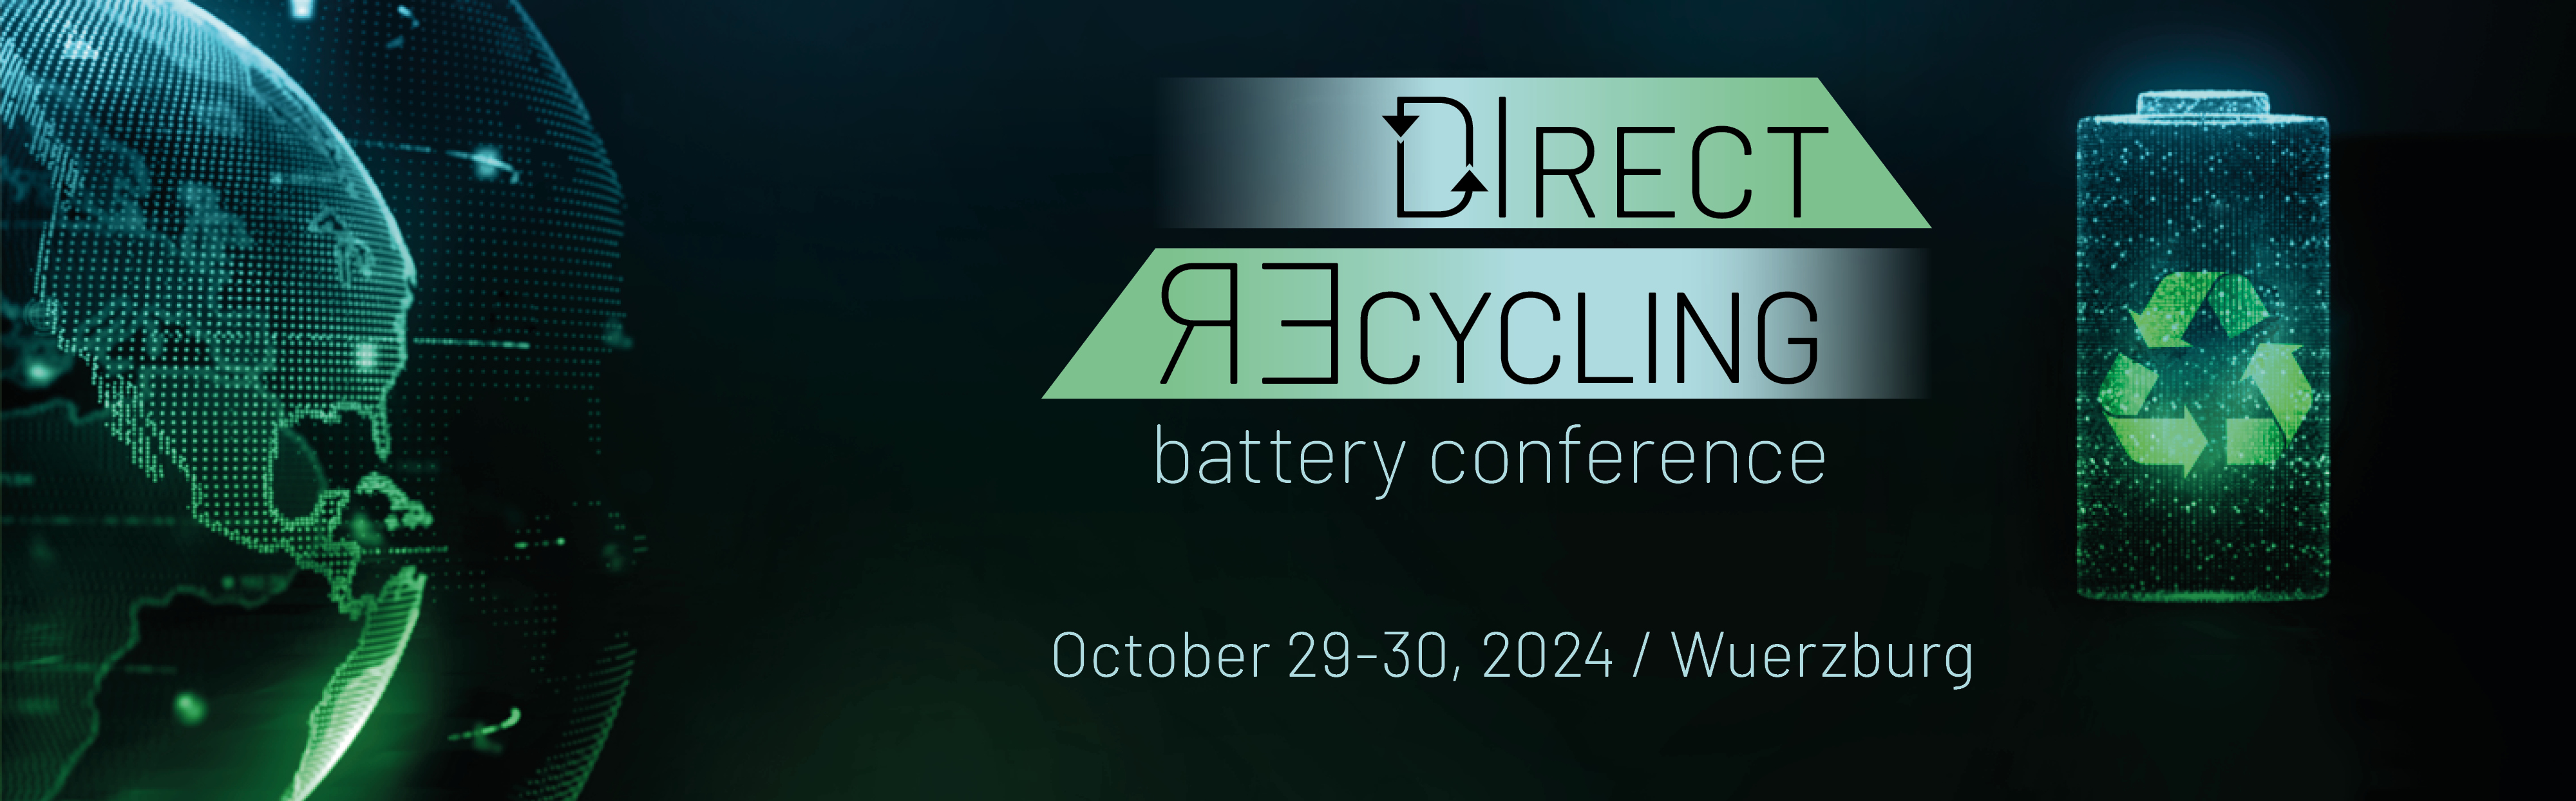 Direct Recycling Battery Conference 2024